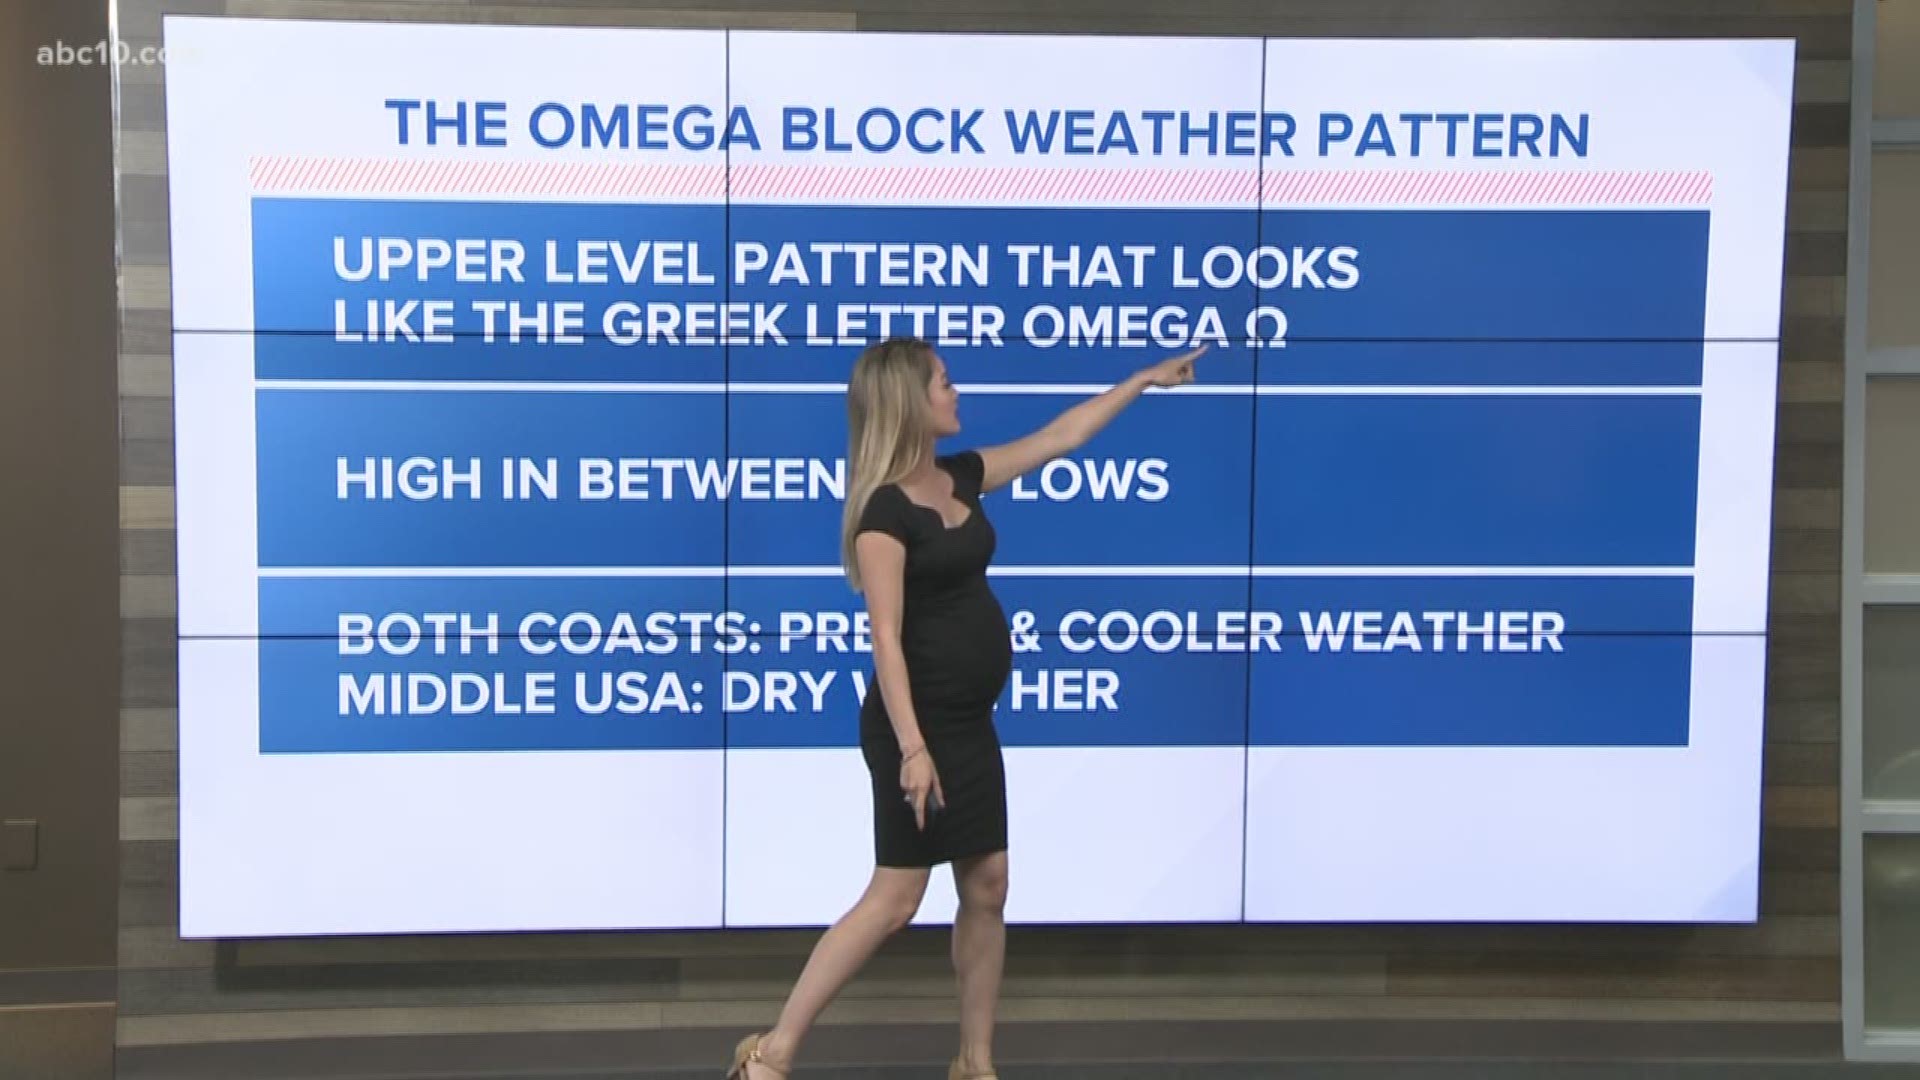 Upper level weather pattern that resembles the uppercase Greek letter, omega.